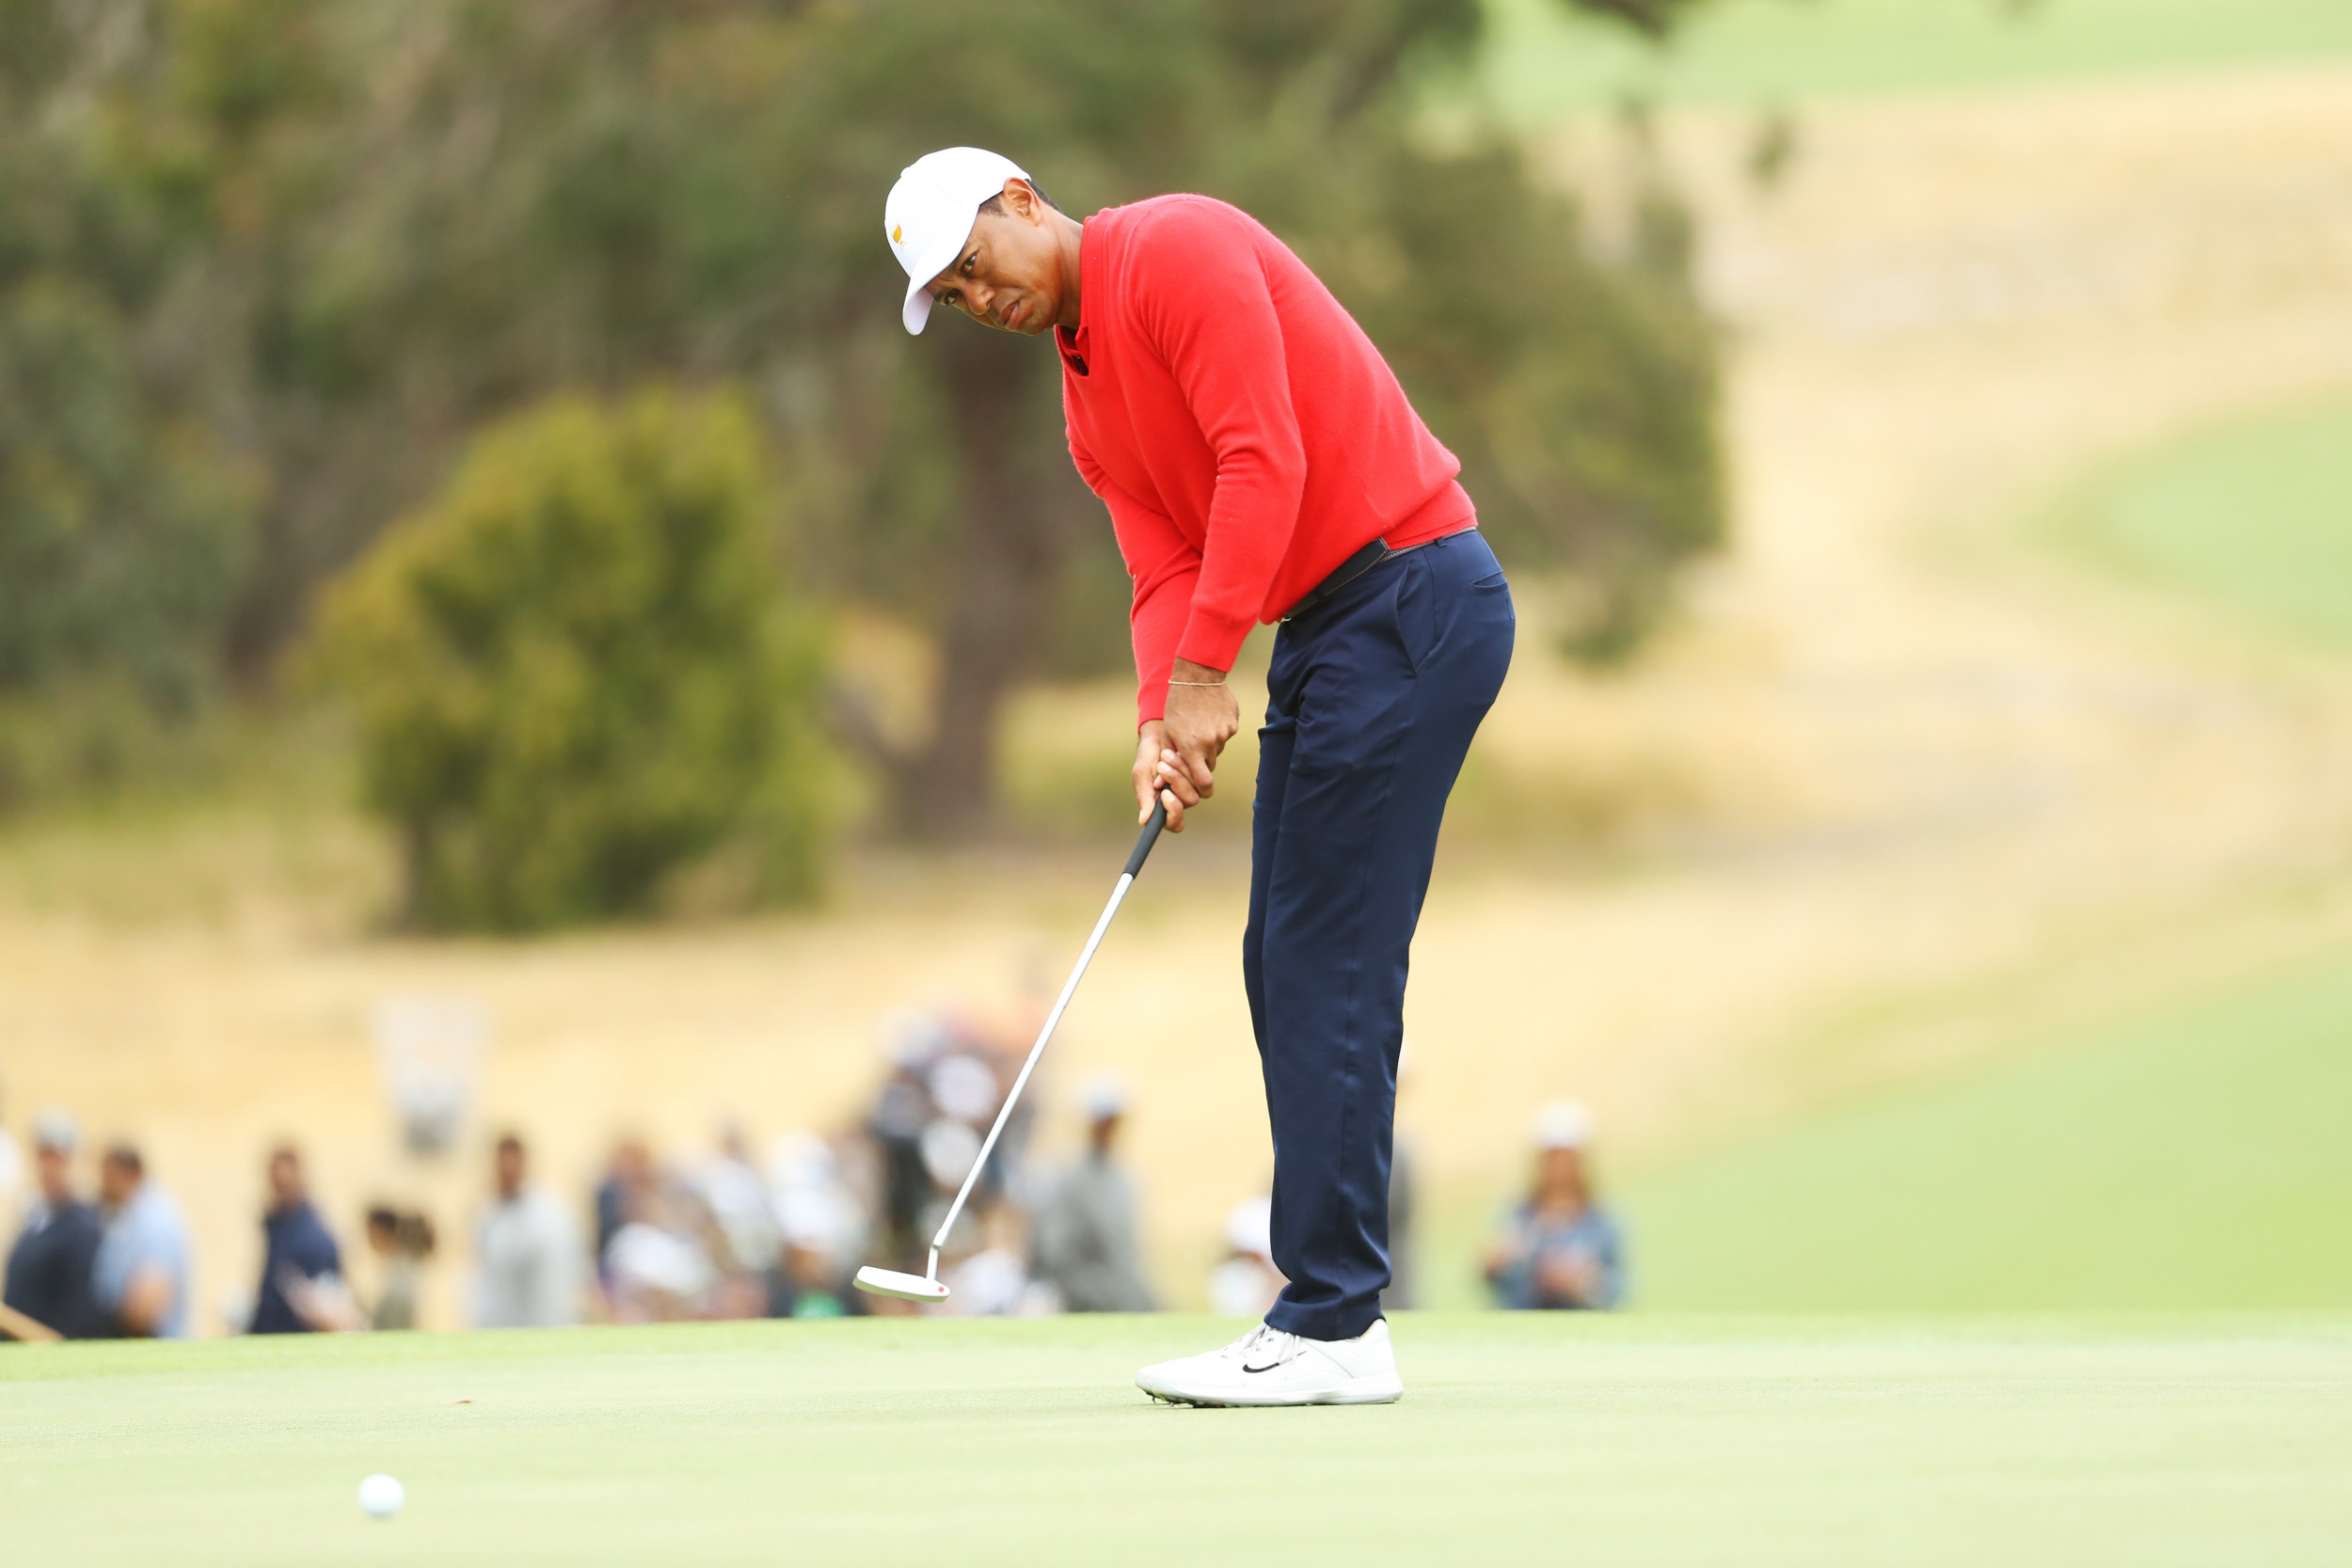 Farmers Insurance Open 2020 Dates, TV Schedule, How to Watch PGA Tour Online